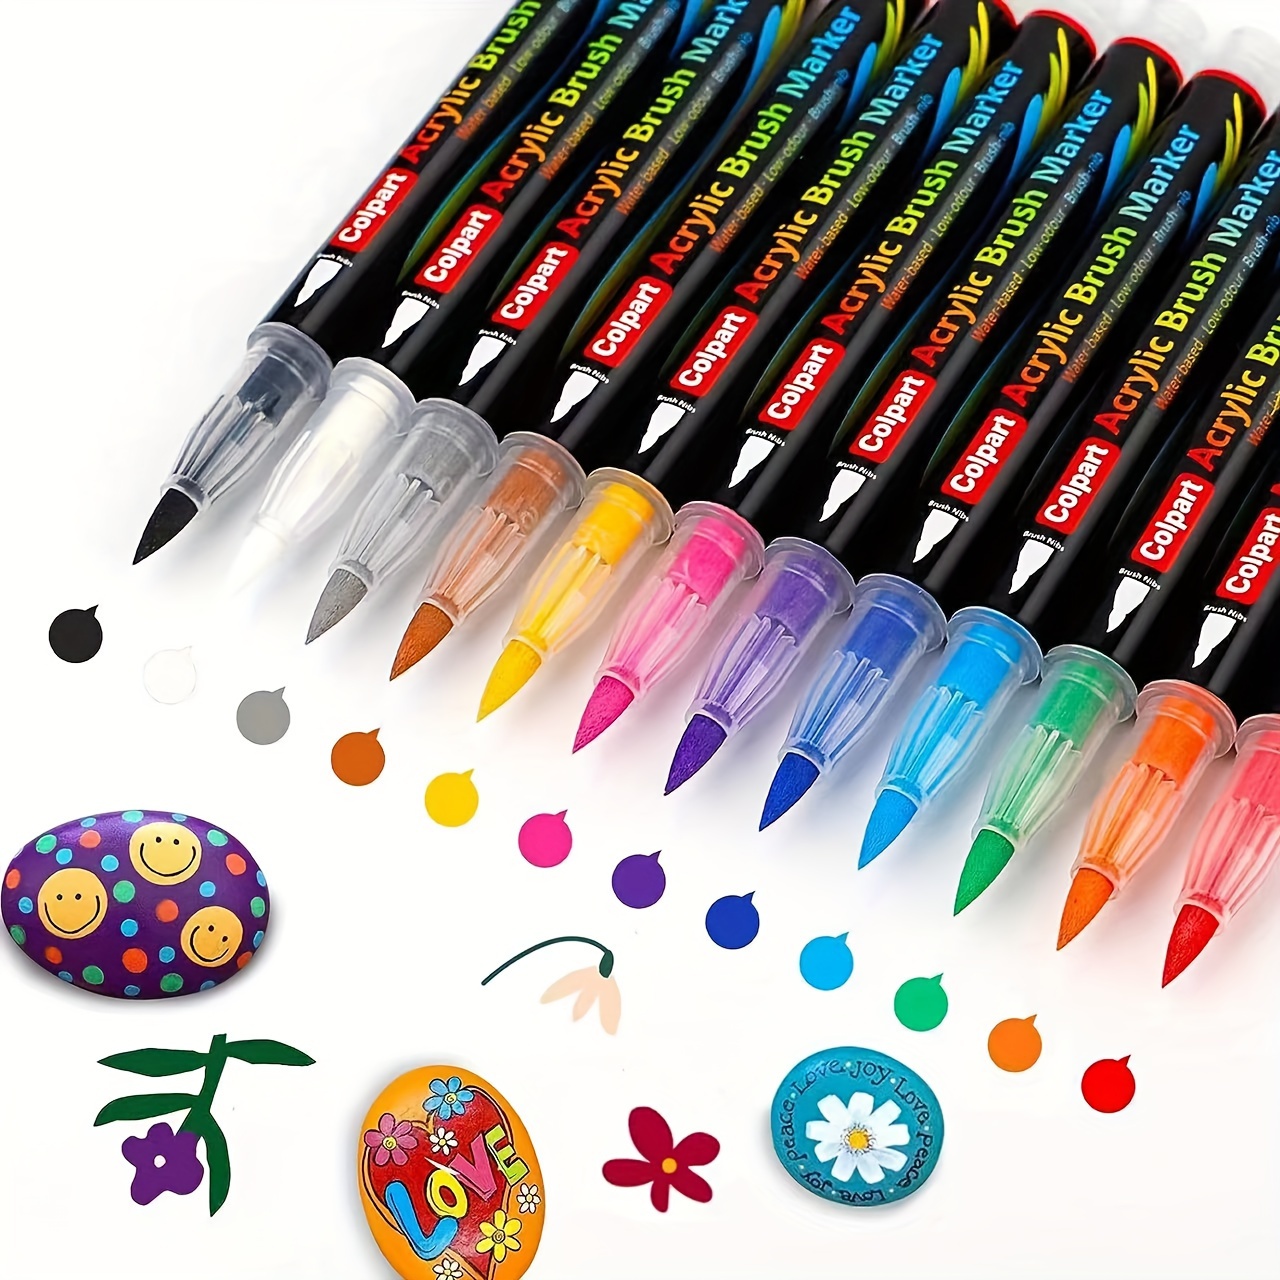  colpart Brush Tip Acrylic Paint Pens-36 Colors Acrylic